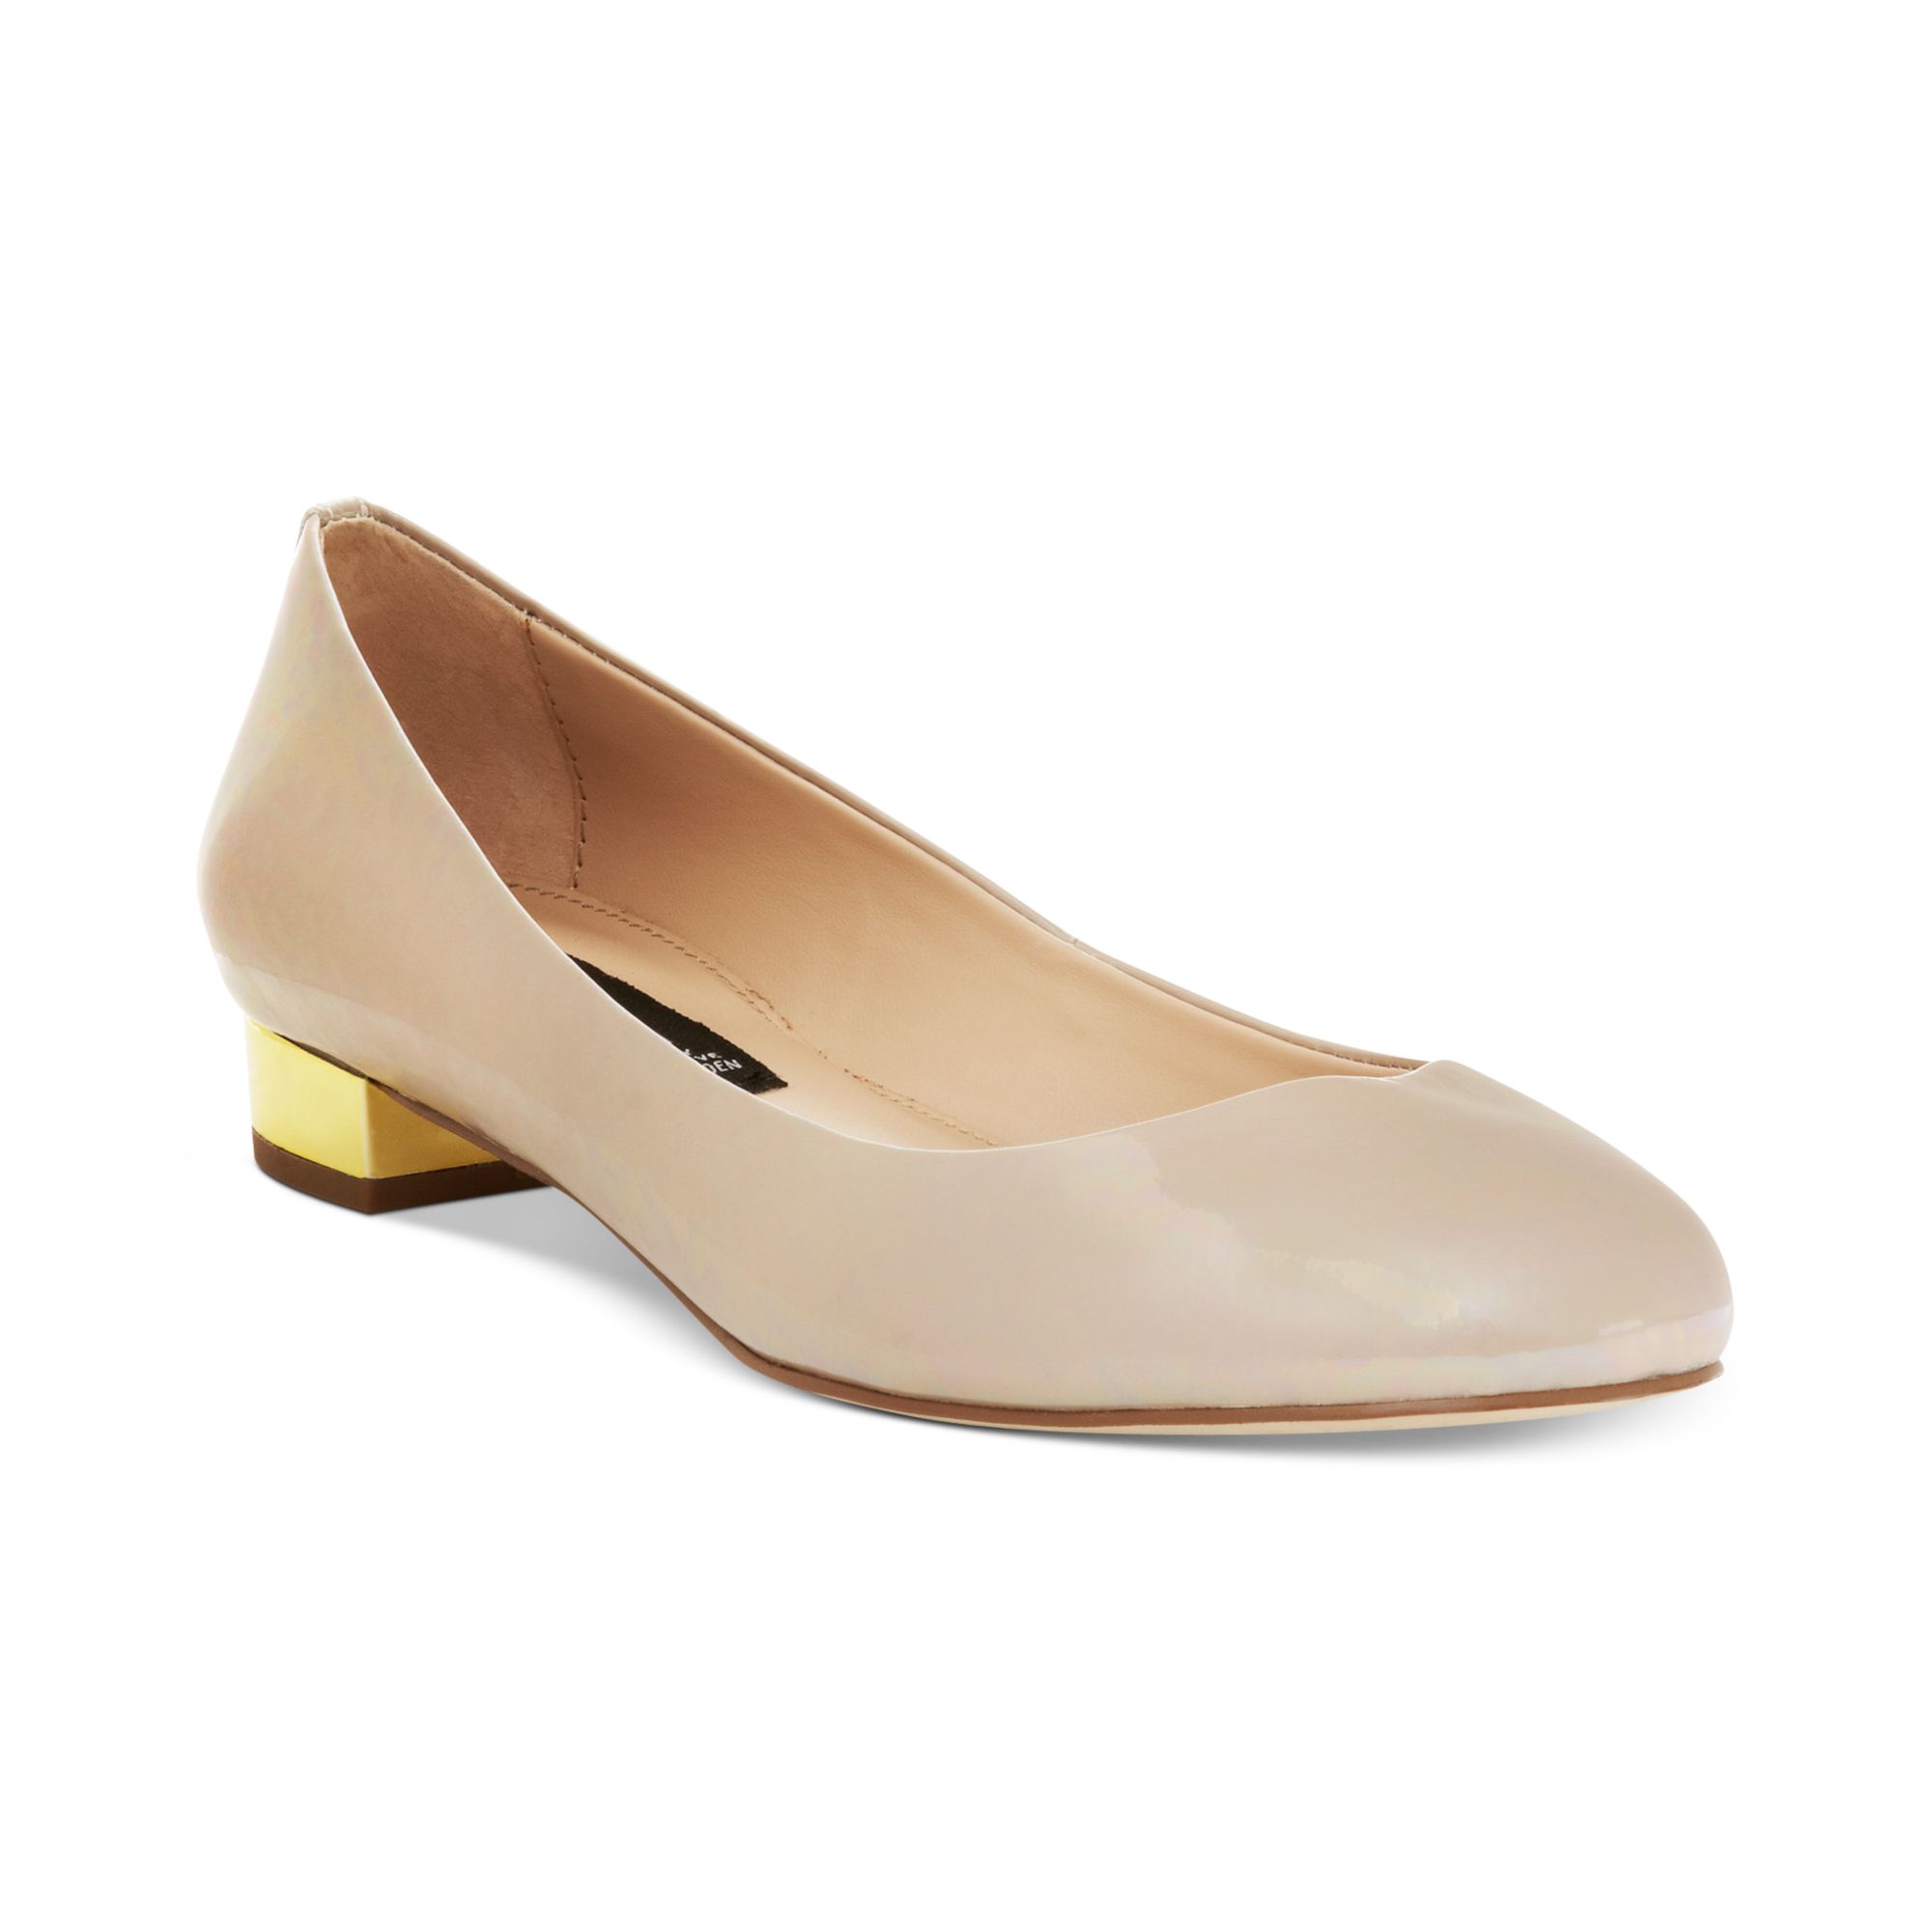 Steven by Steve Madden Paige Low Heel Pumps in Natural - Lyst